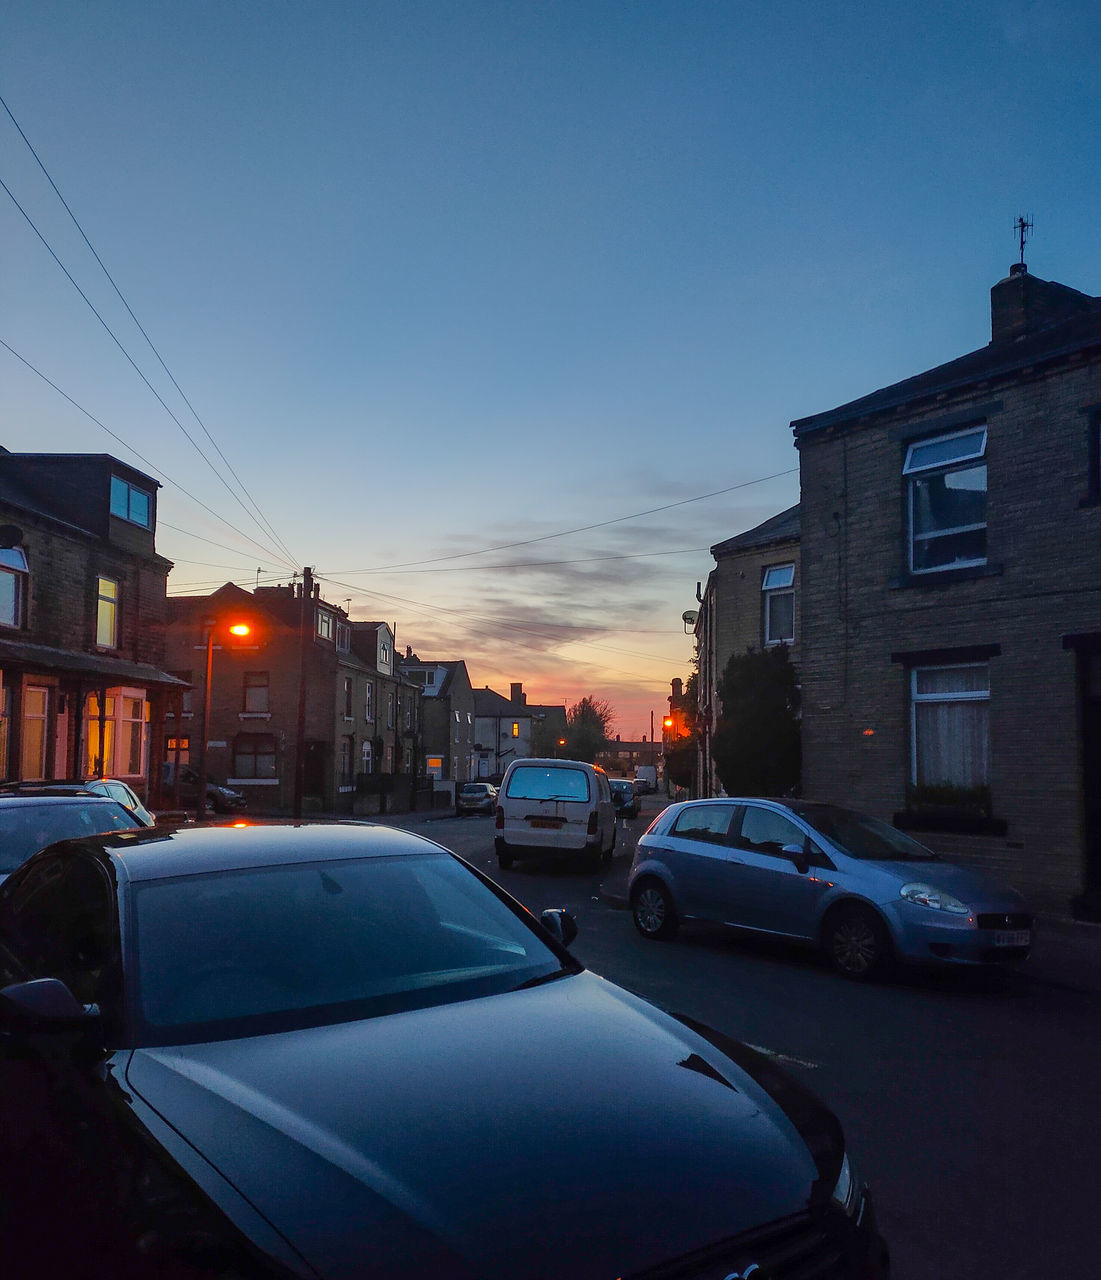 CARS ON ROAD BY BUILDINGS AGAINST SKY AT DUSK